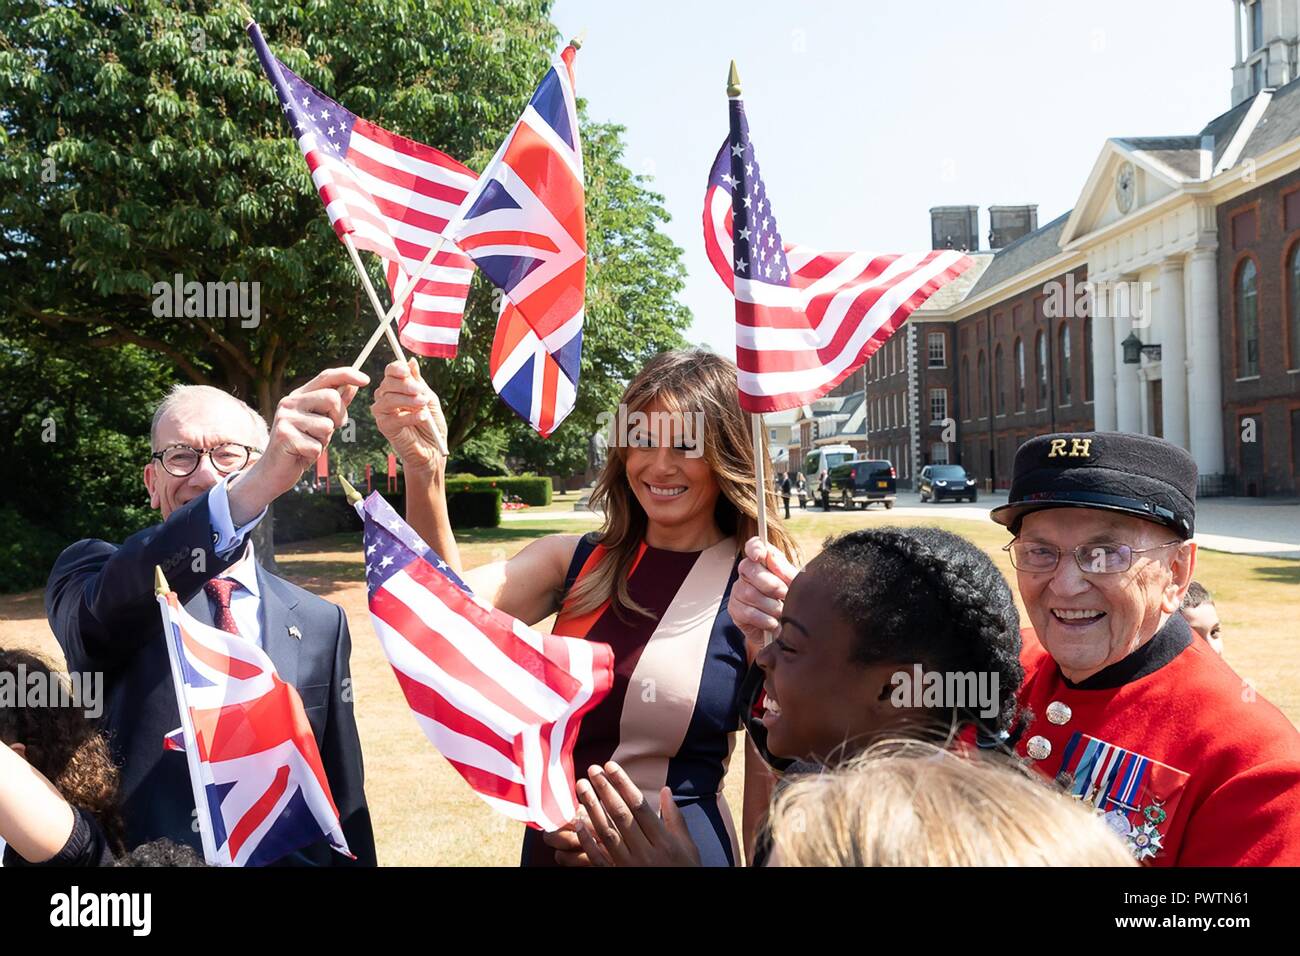 U.S First Lady Melania Trump and Philip May, husband of British Prime Minister Theresa May, wave British and American flags during a visit to the Royal Hospital Chelsea July 13, 2018 in London, United Kingdom. Stock Photo